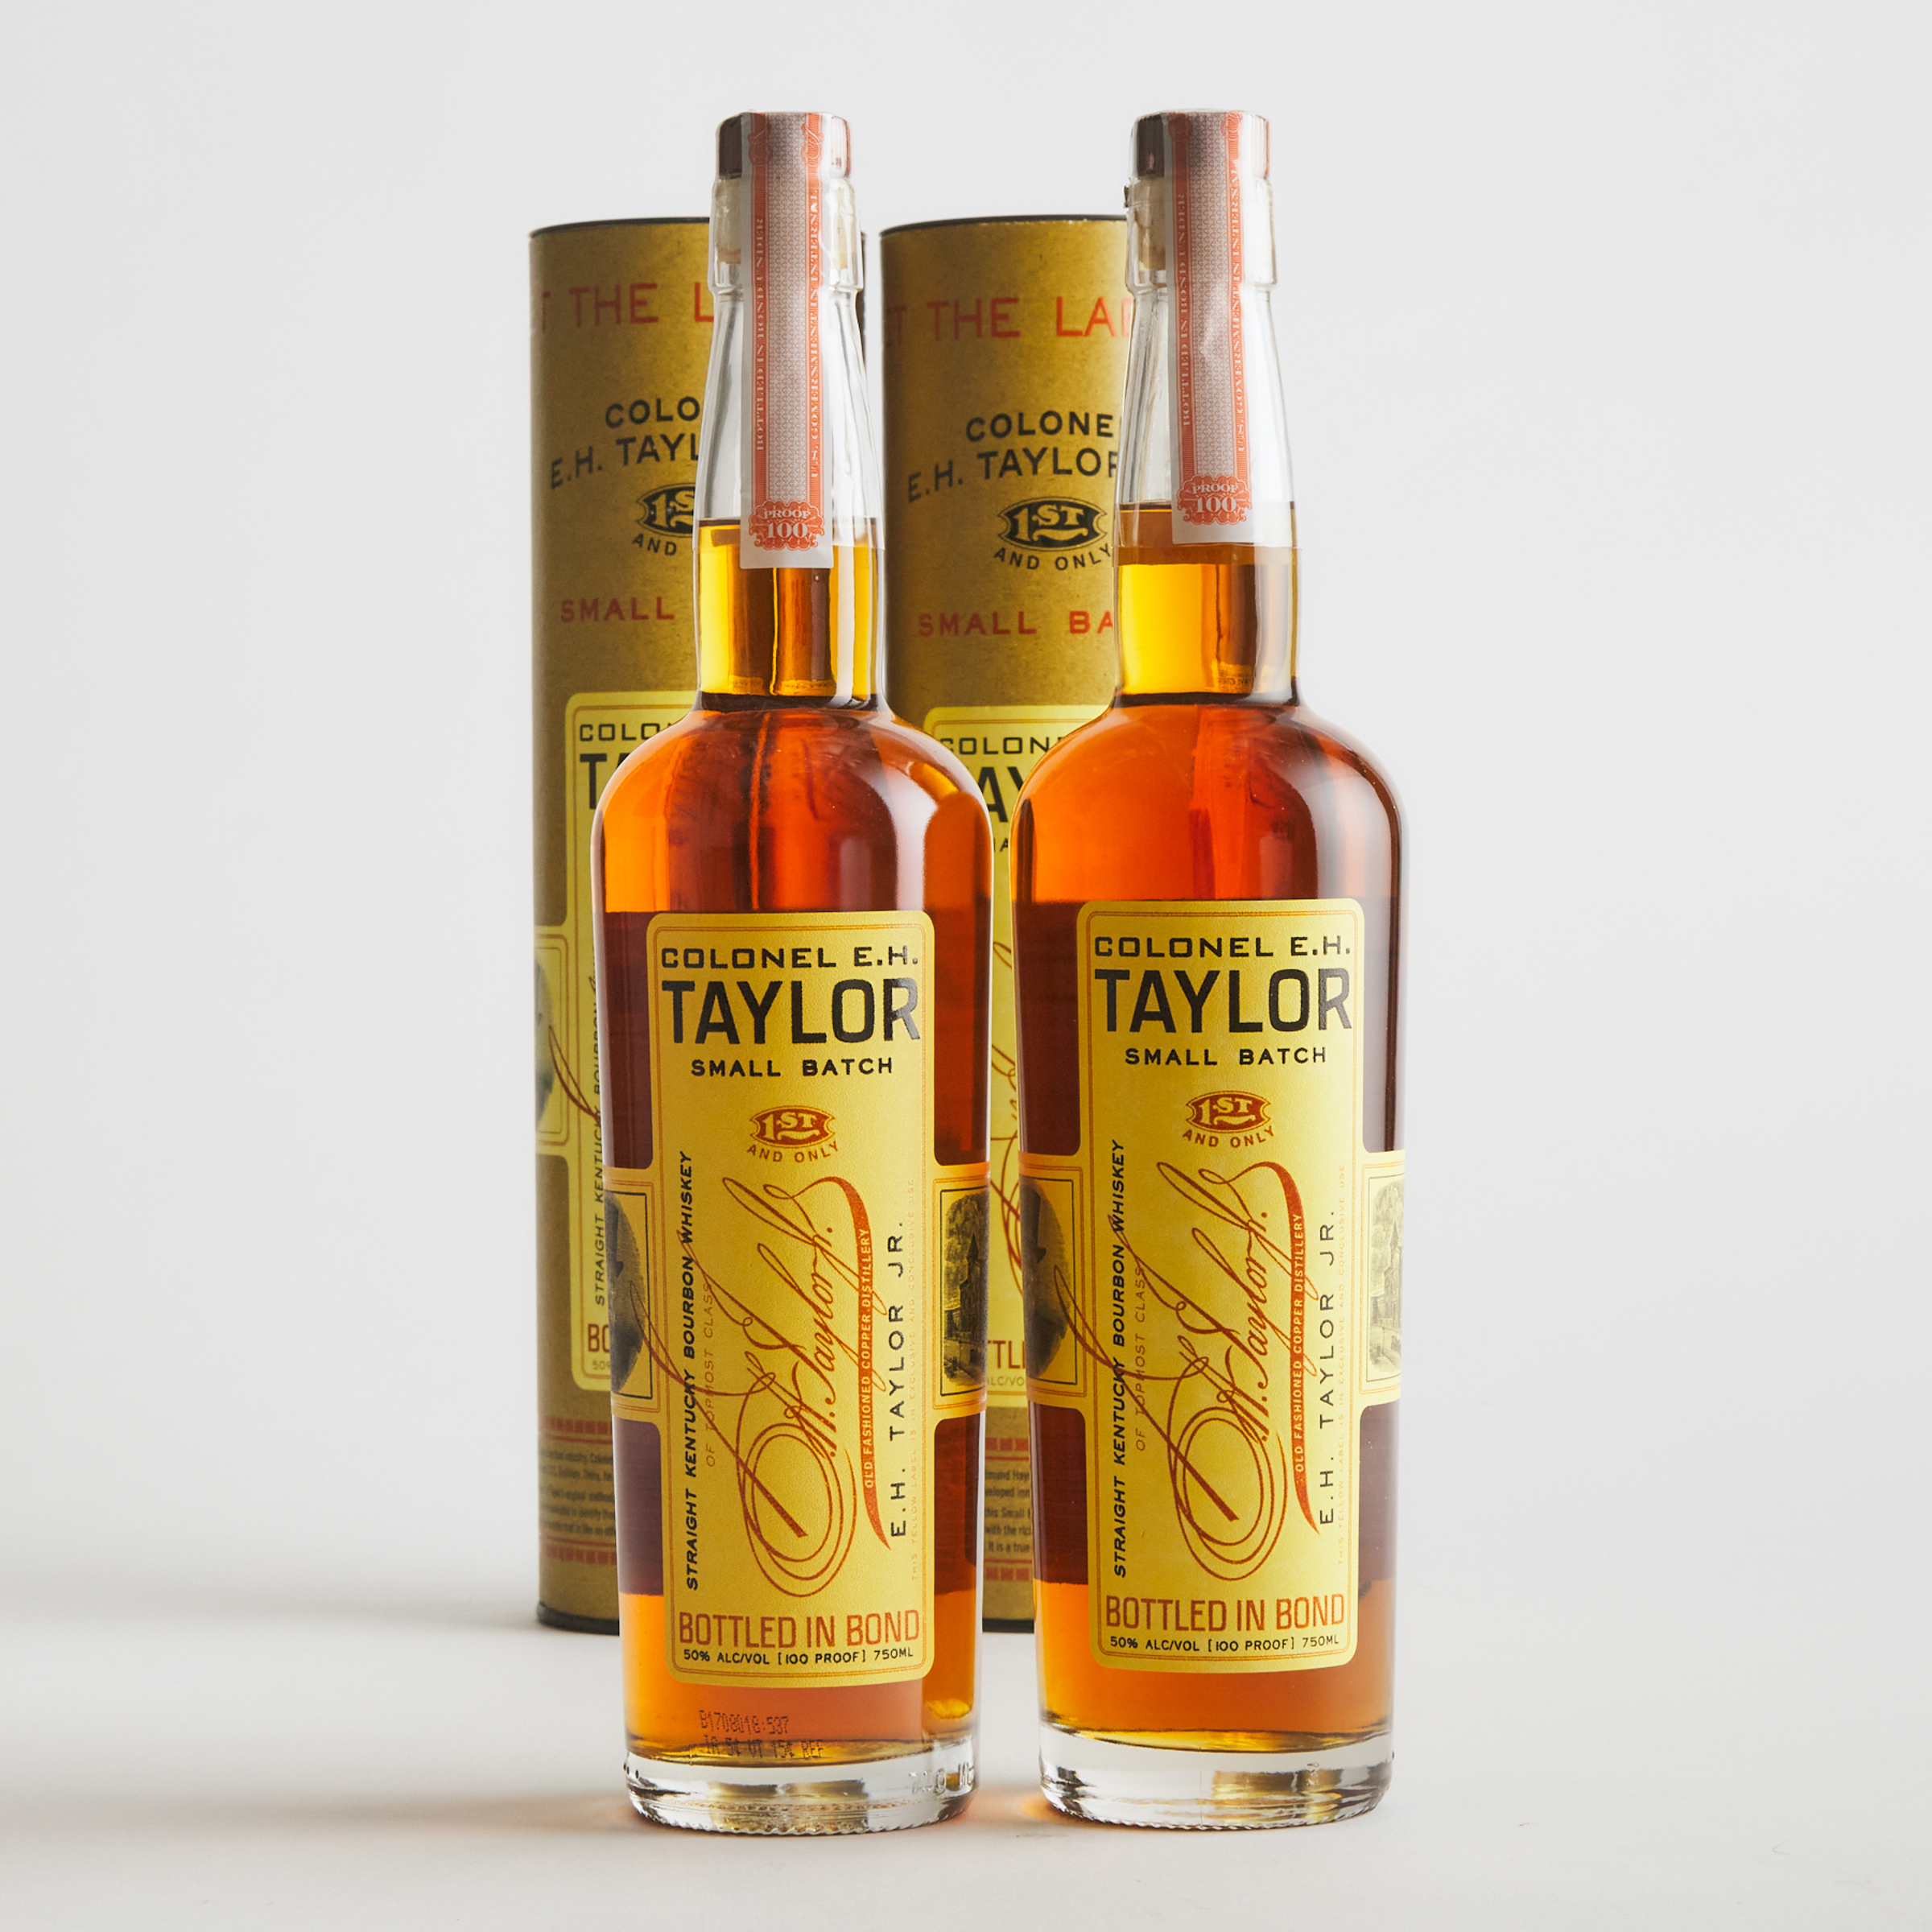 COLONEL E.H. TAYLOR JR. SMALL BATCH STRAIGHT KENTUCKY BOURBON WHISKEY (TWO 750 ML)